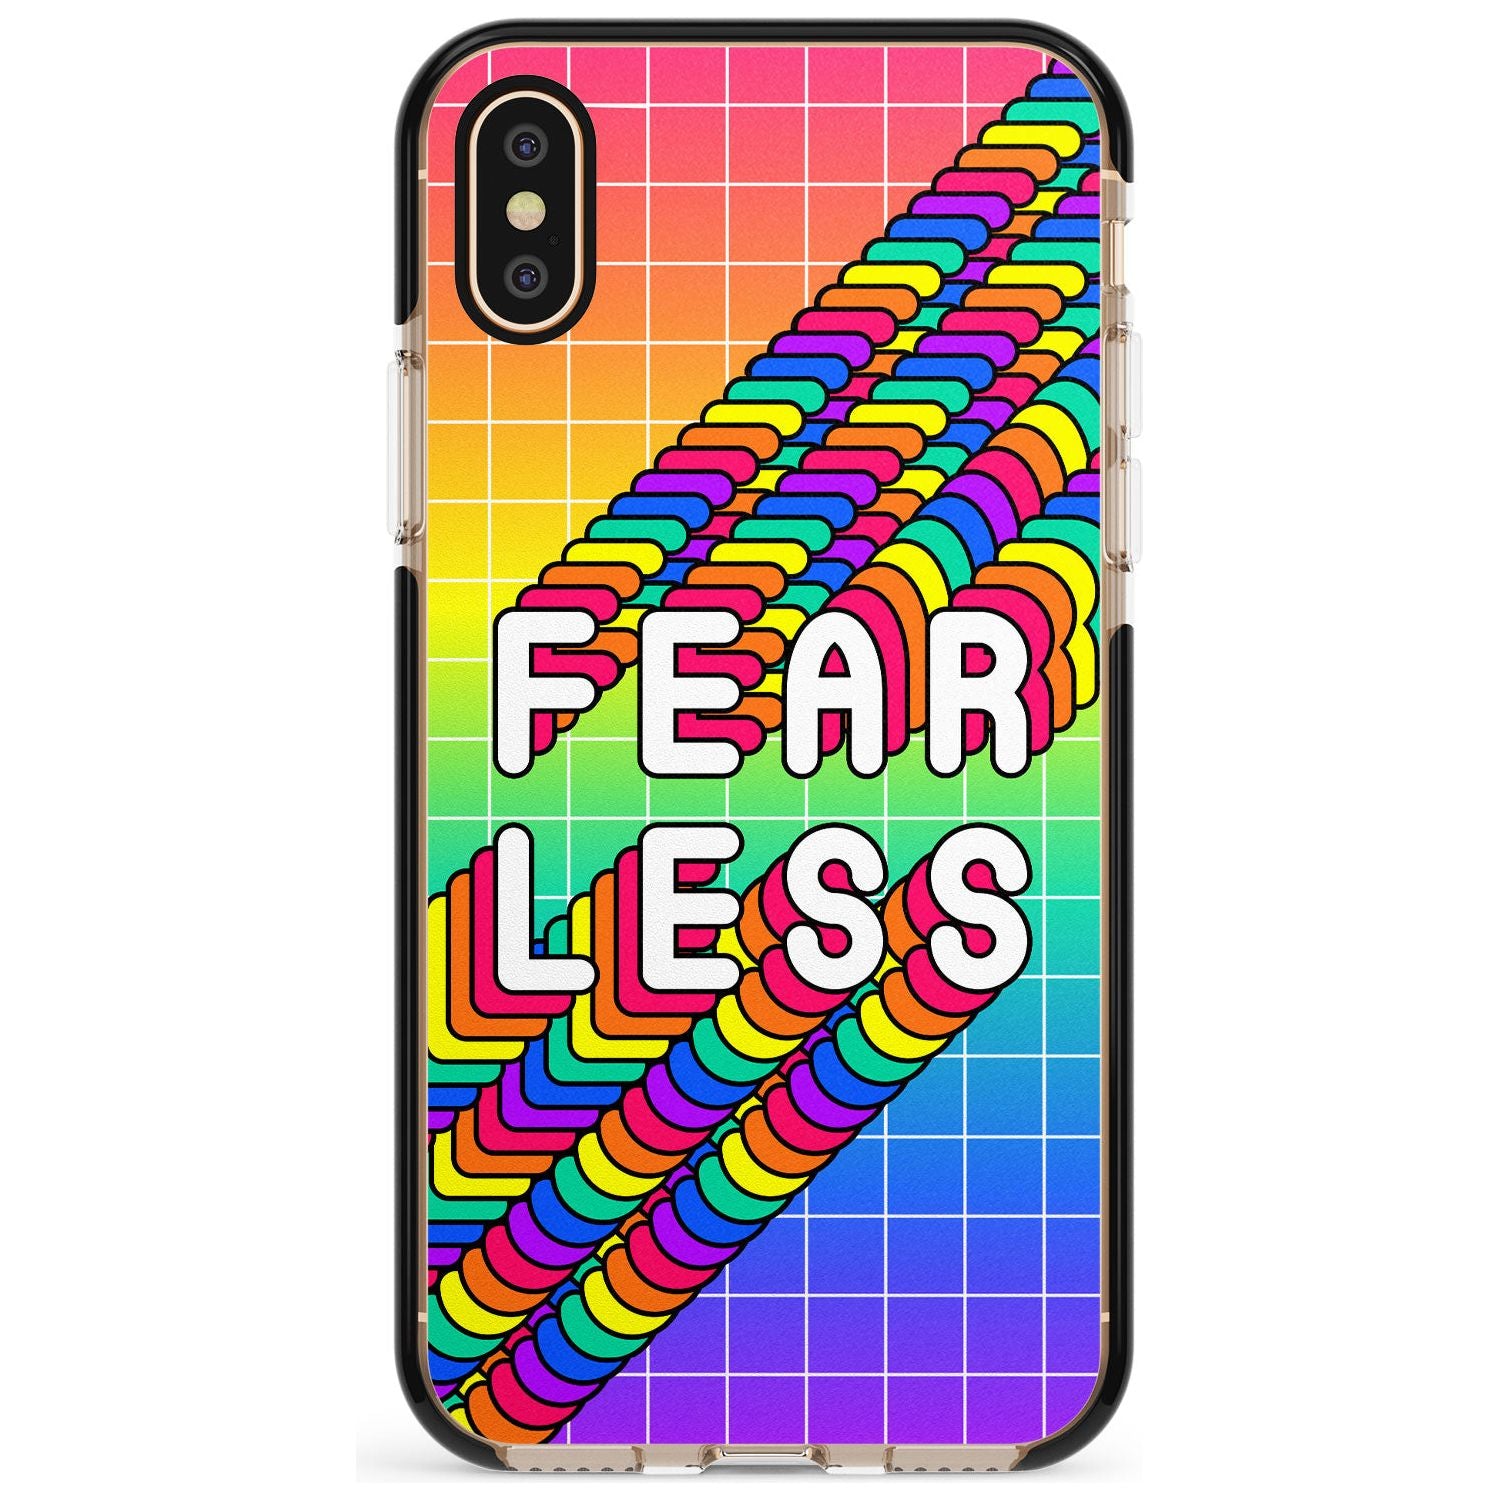 Fearless Black Impact Phone Case for iPhone X XS Max XR